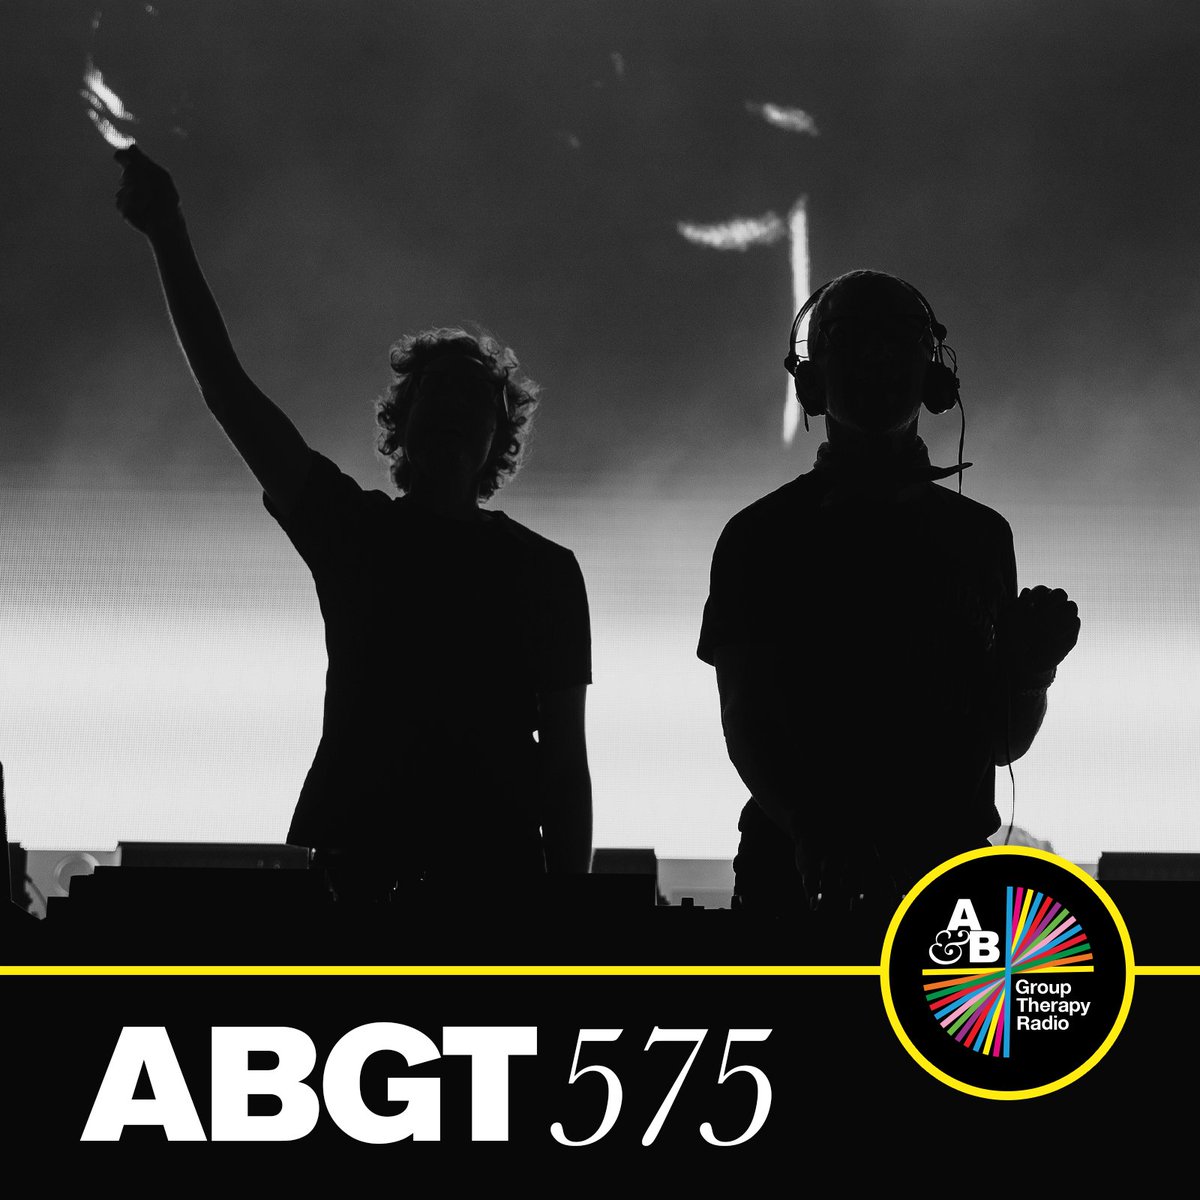 A world exclusive tonight on ABGT, hear a brand new ID from @amywilesmusic and @Noureymusic. Plus, new music from @sonata_therio and @darrentate. Tune in from 7pm BST, after our Flow State Yoga premiere on YouTube.